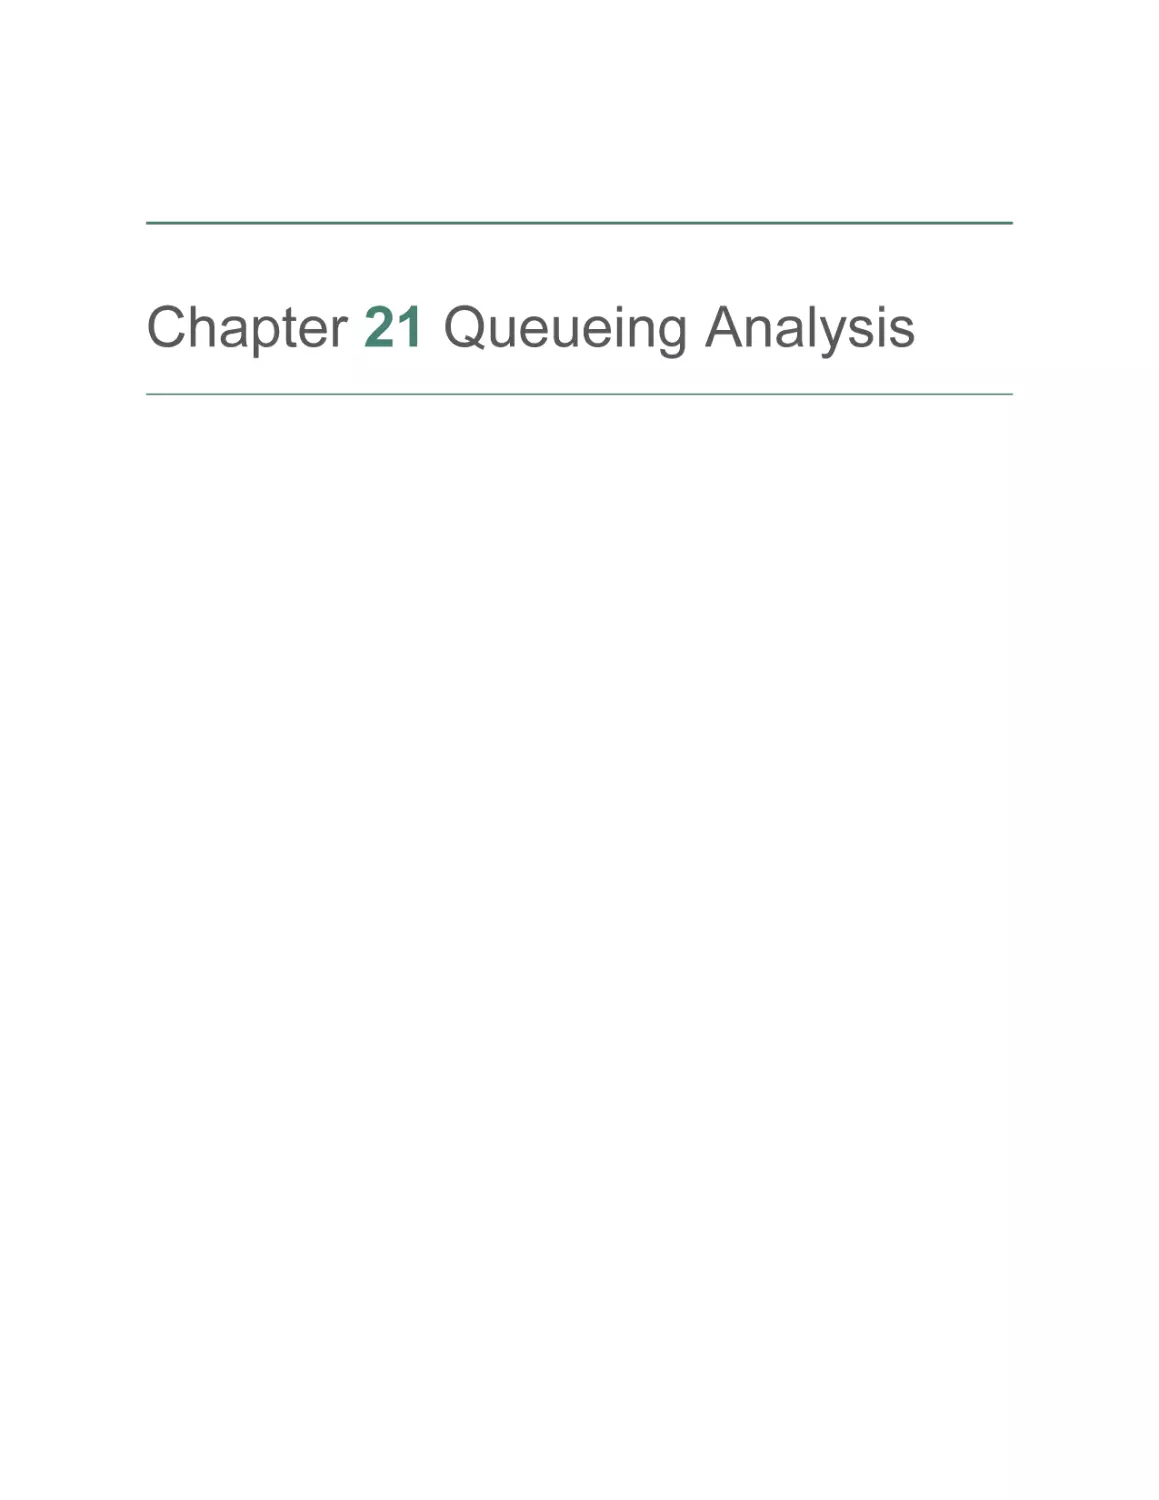 Chapter 21 Queueing Analysis